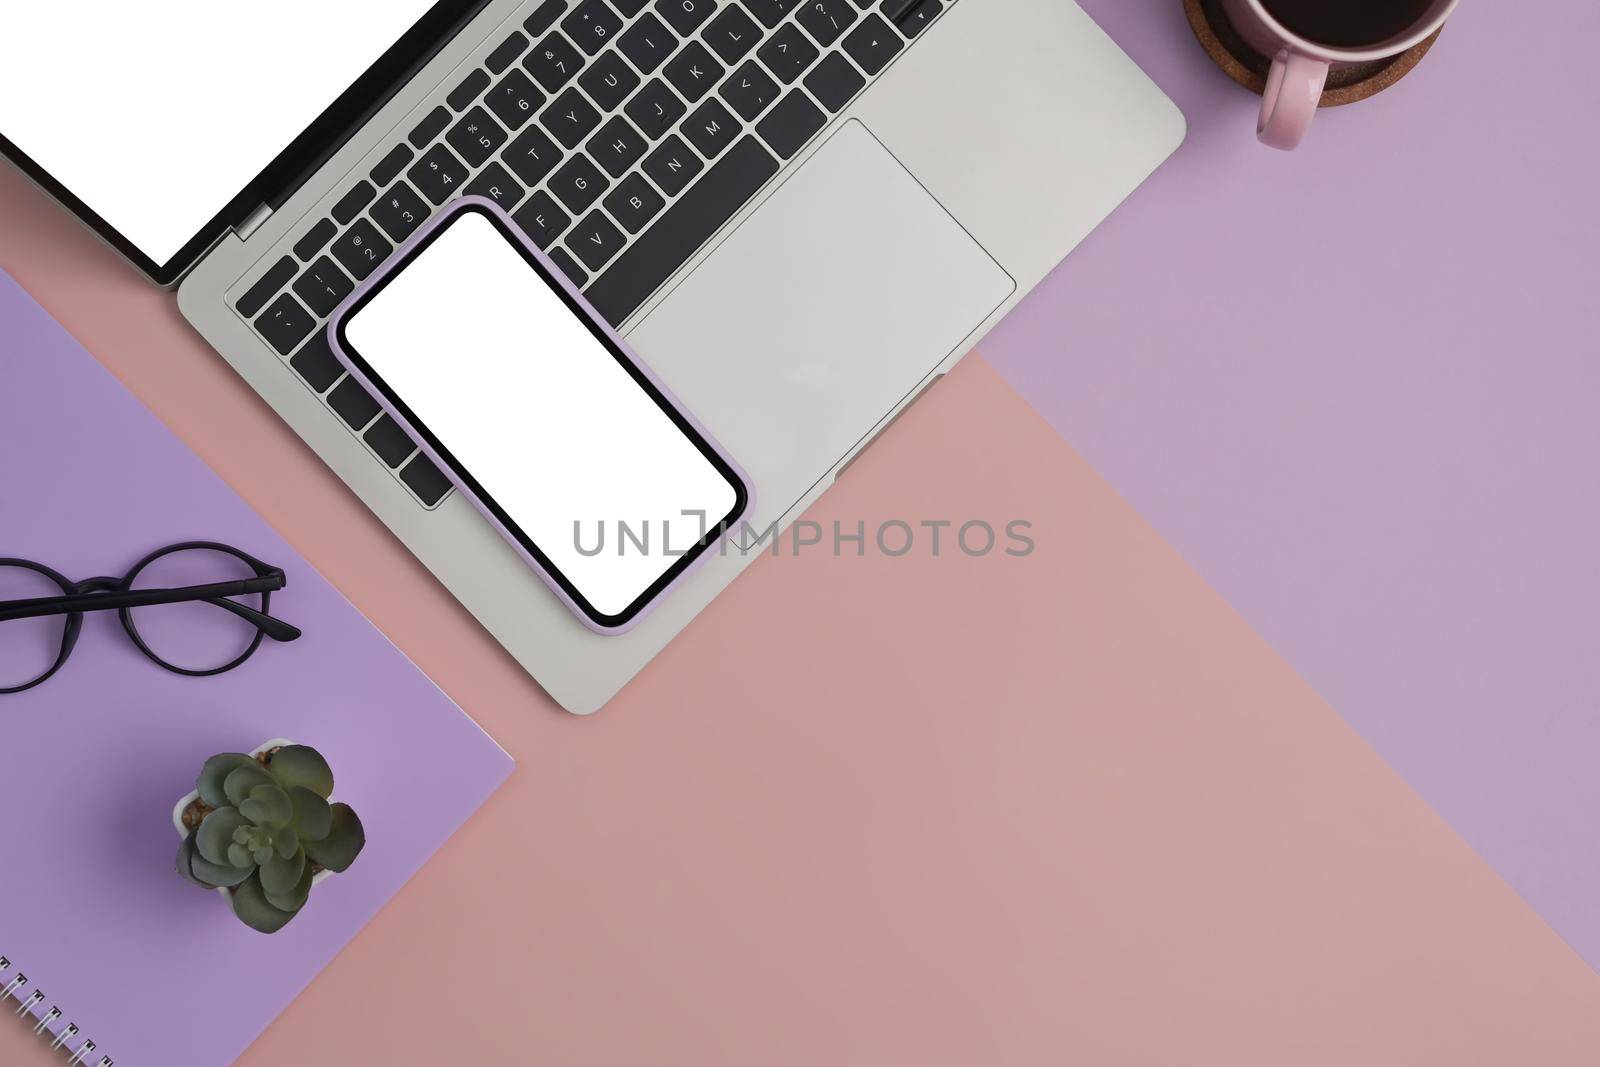 Flat lay mockup laptop computer, smartphone, glasses and coffee cup on two tone background.